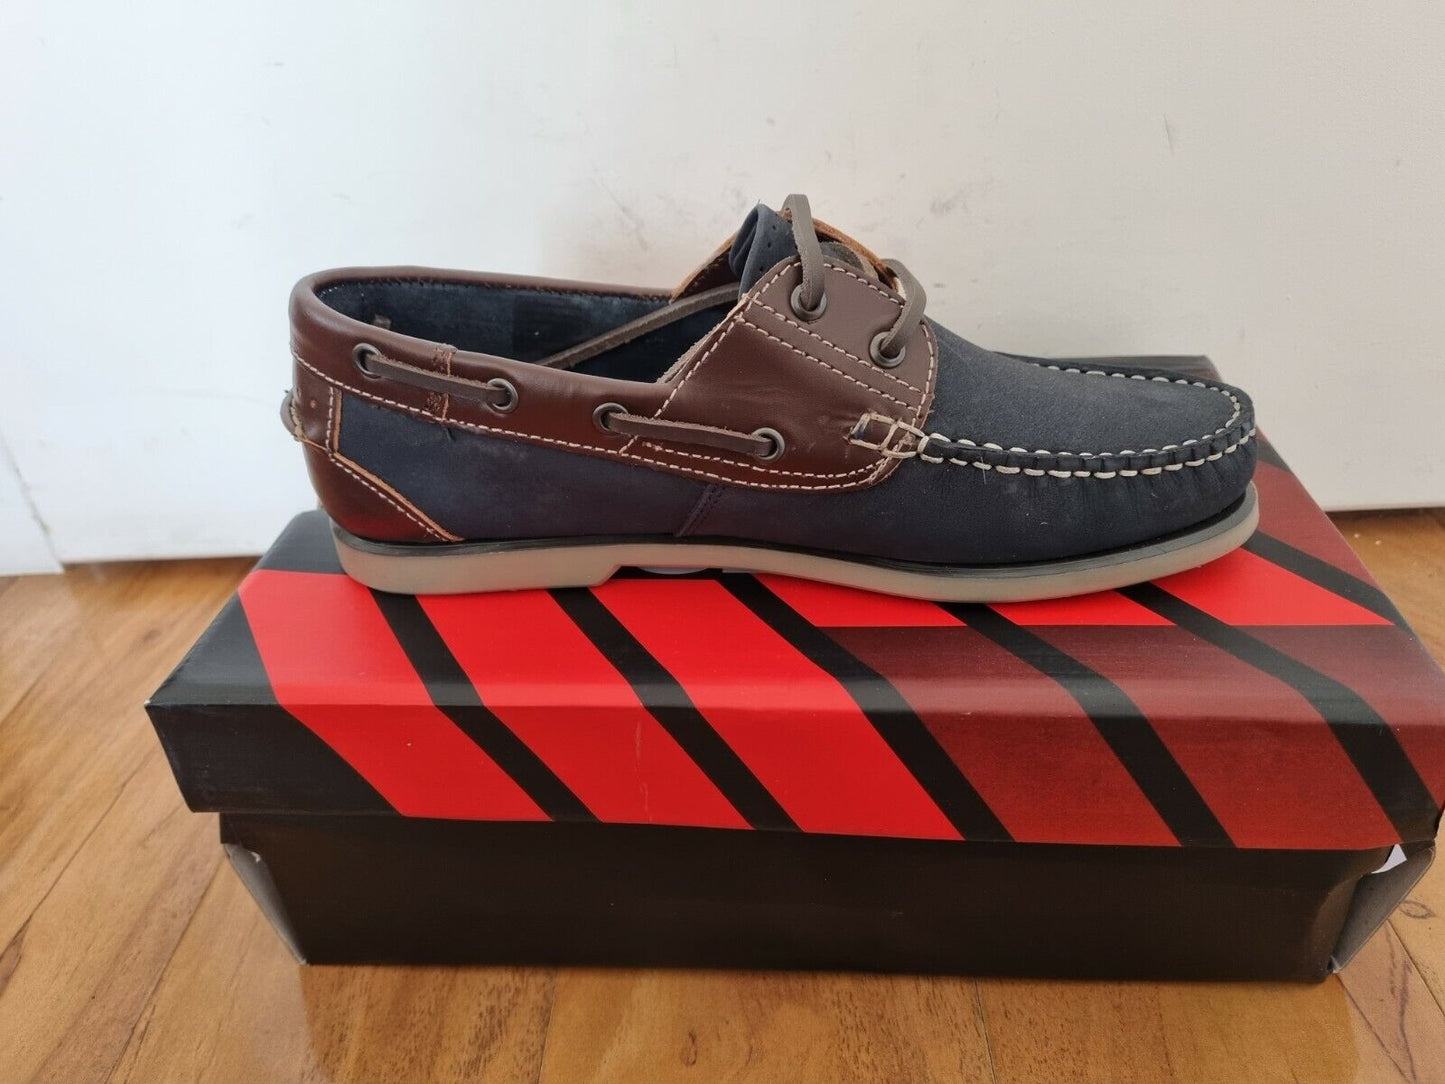 Boat Shoe by Dek - Navy Blue\Brown Lace Up Leather Boat Shoes